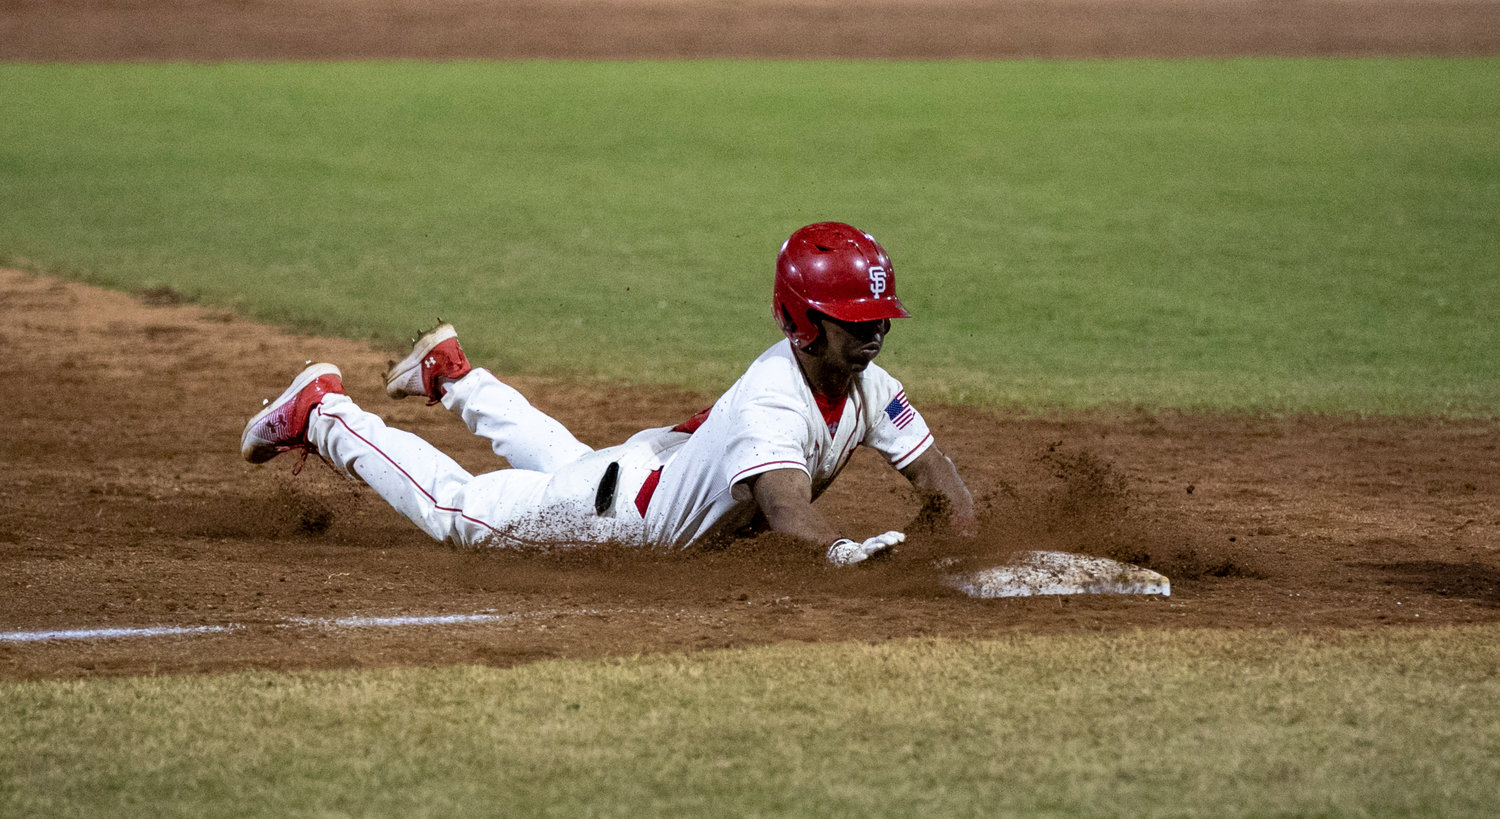 Toro sophomore Nehemiah Hixon slides into third during Spanish Fort’s two-run sixth inning that extended their lead to 7-4 over St. Paul’s during the Opening Day matchup Thursday night, Feb. 16. Hixon was also part of a big double play that kept the Saints off the board in the fifth inning.